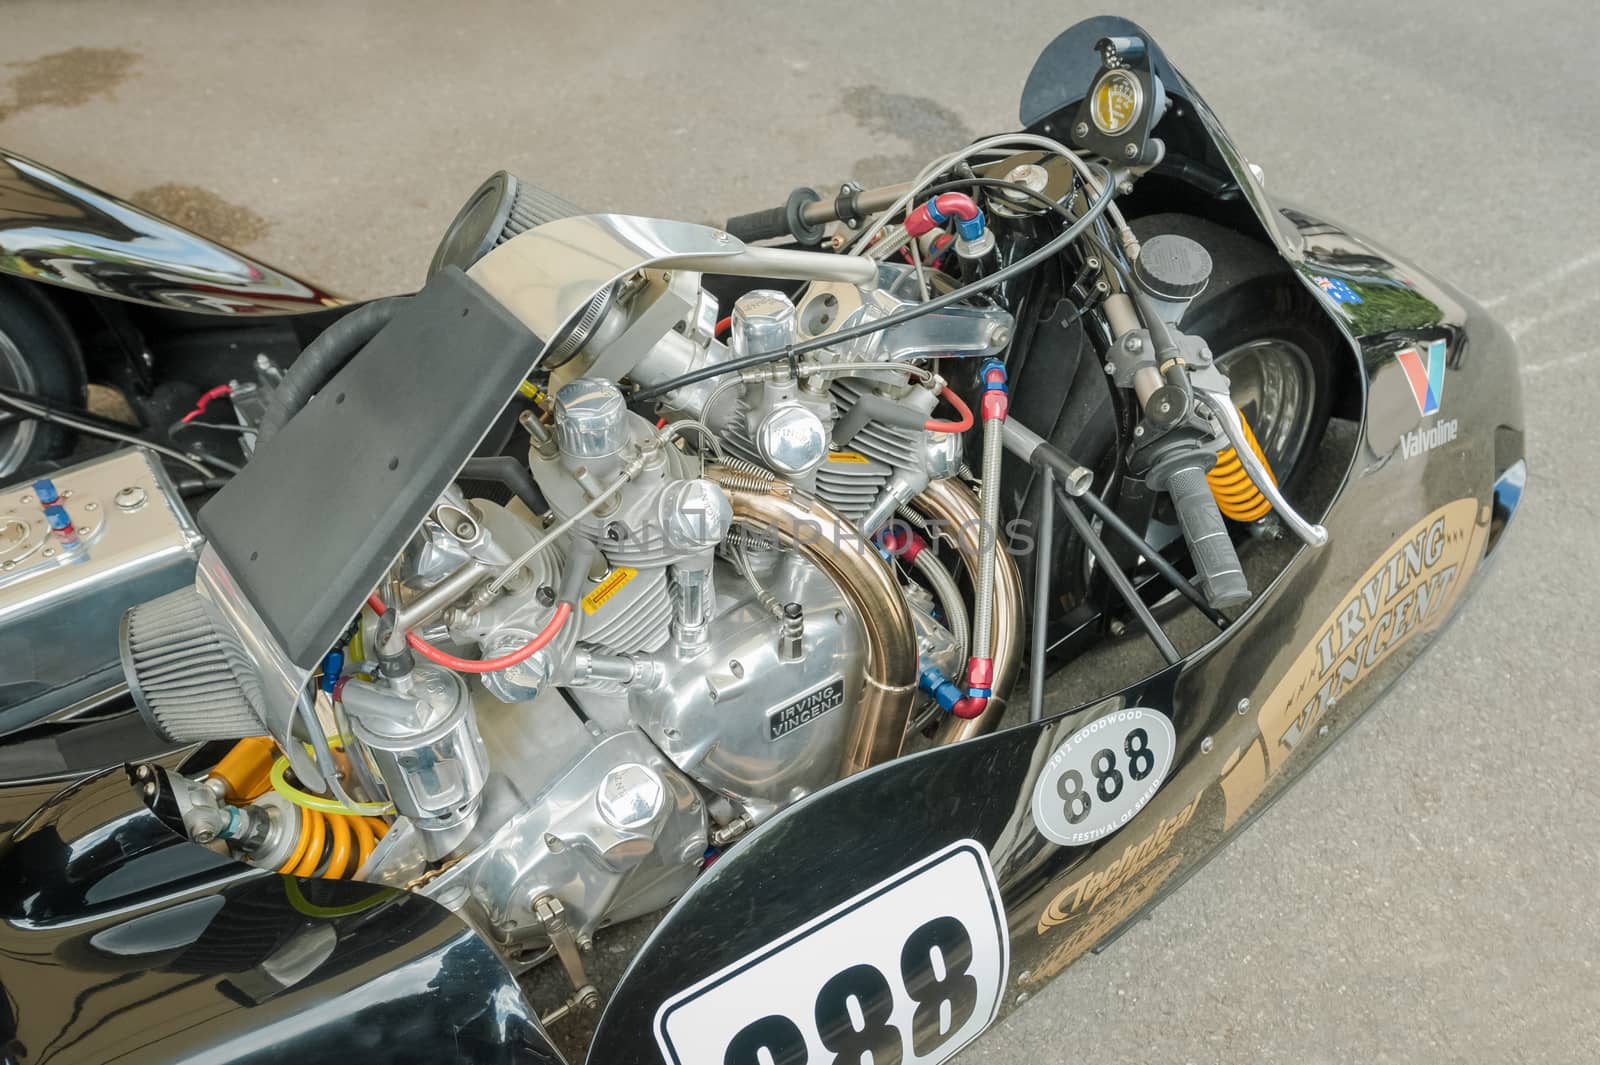 GOODWOOD, UK - JULY 1, 2012: Closeup detail of an Irving Vincent sidecar outfit in the service pits at the Festival of Speed motor-sport event held at Goodwood, UK on July 1, 2012